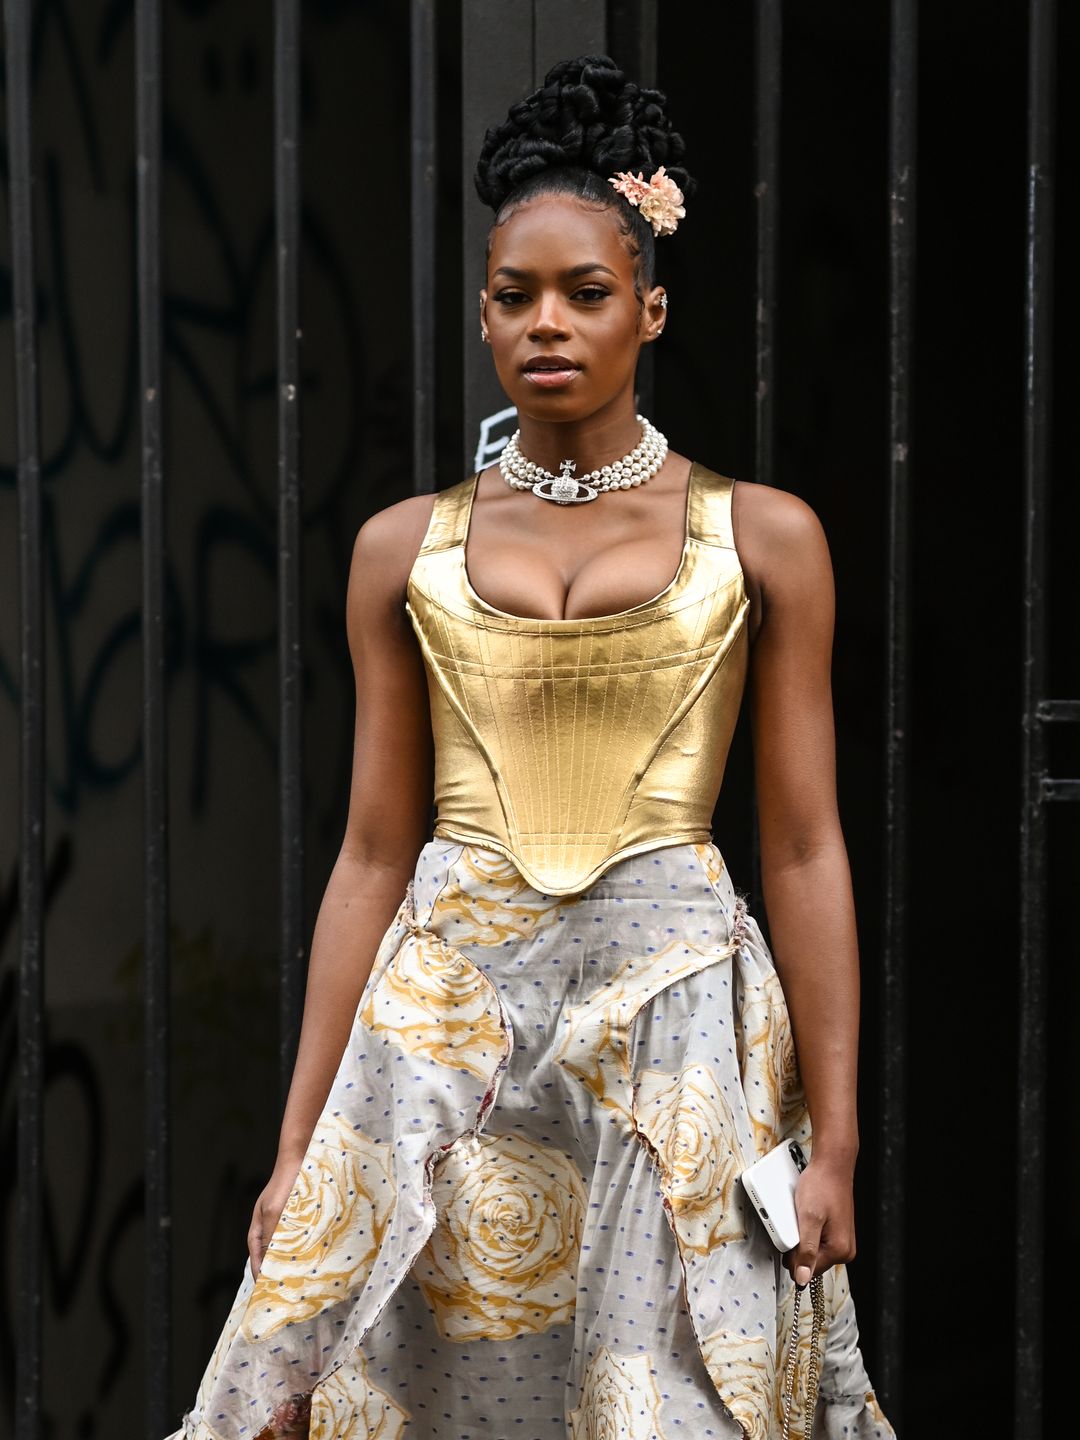 Didi Stone is seen wearing a gold Vivienne Westwood top and skirt and gold strapped heels outside the Vivienne Westwood show during Paris Fashion Week S/S 2022 on October 02, 2021 in Paris,